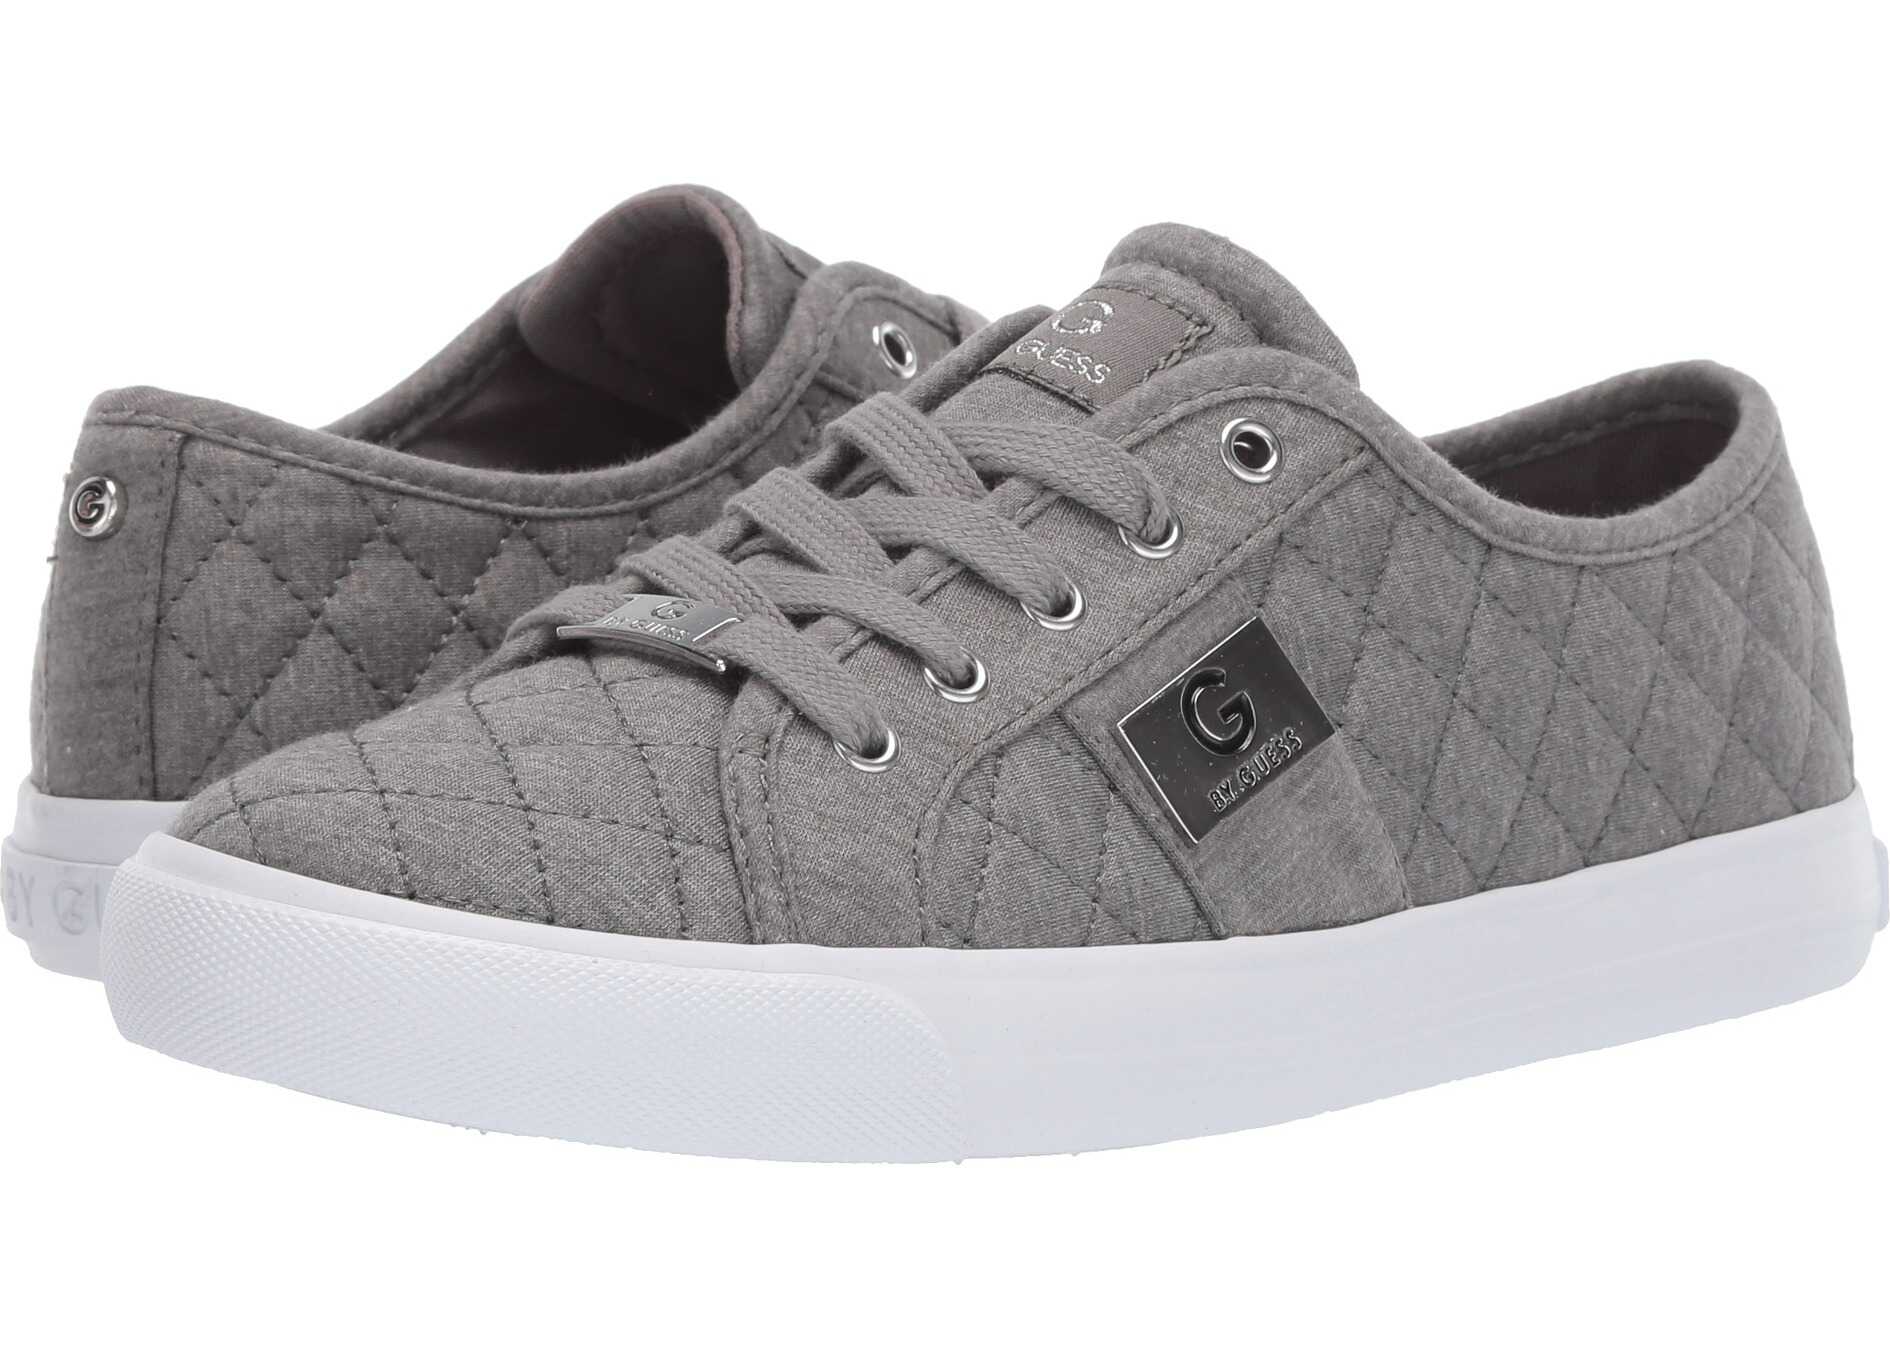 G by GUESS Backer3 Gray